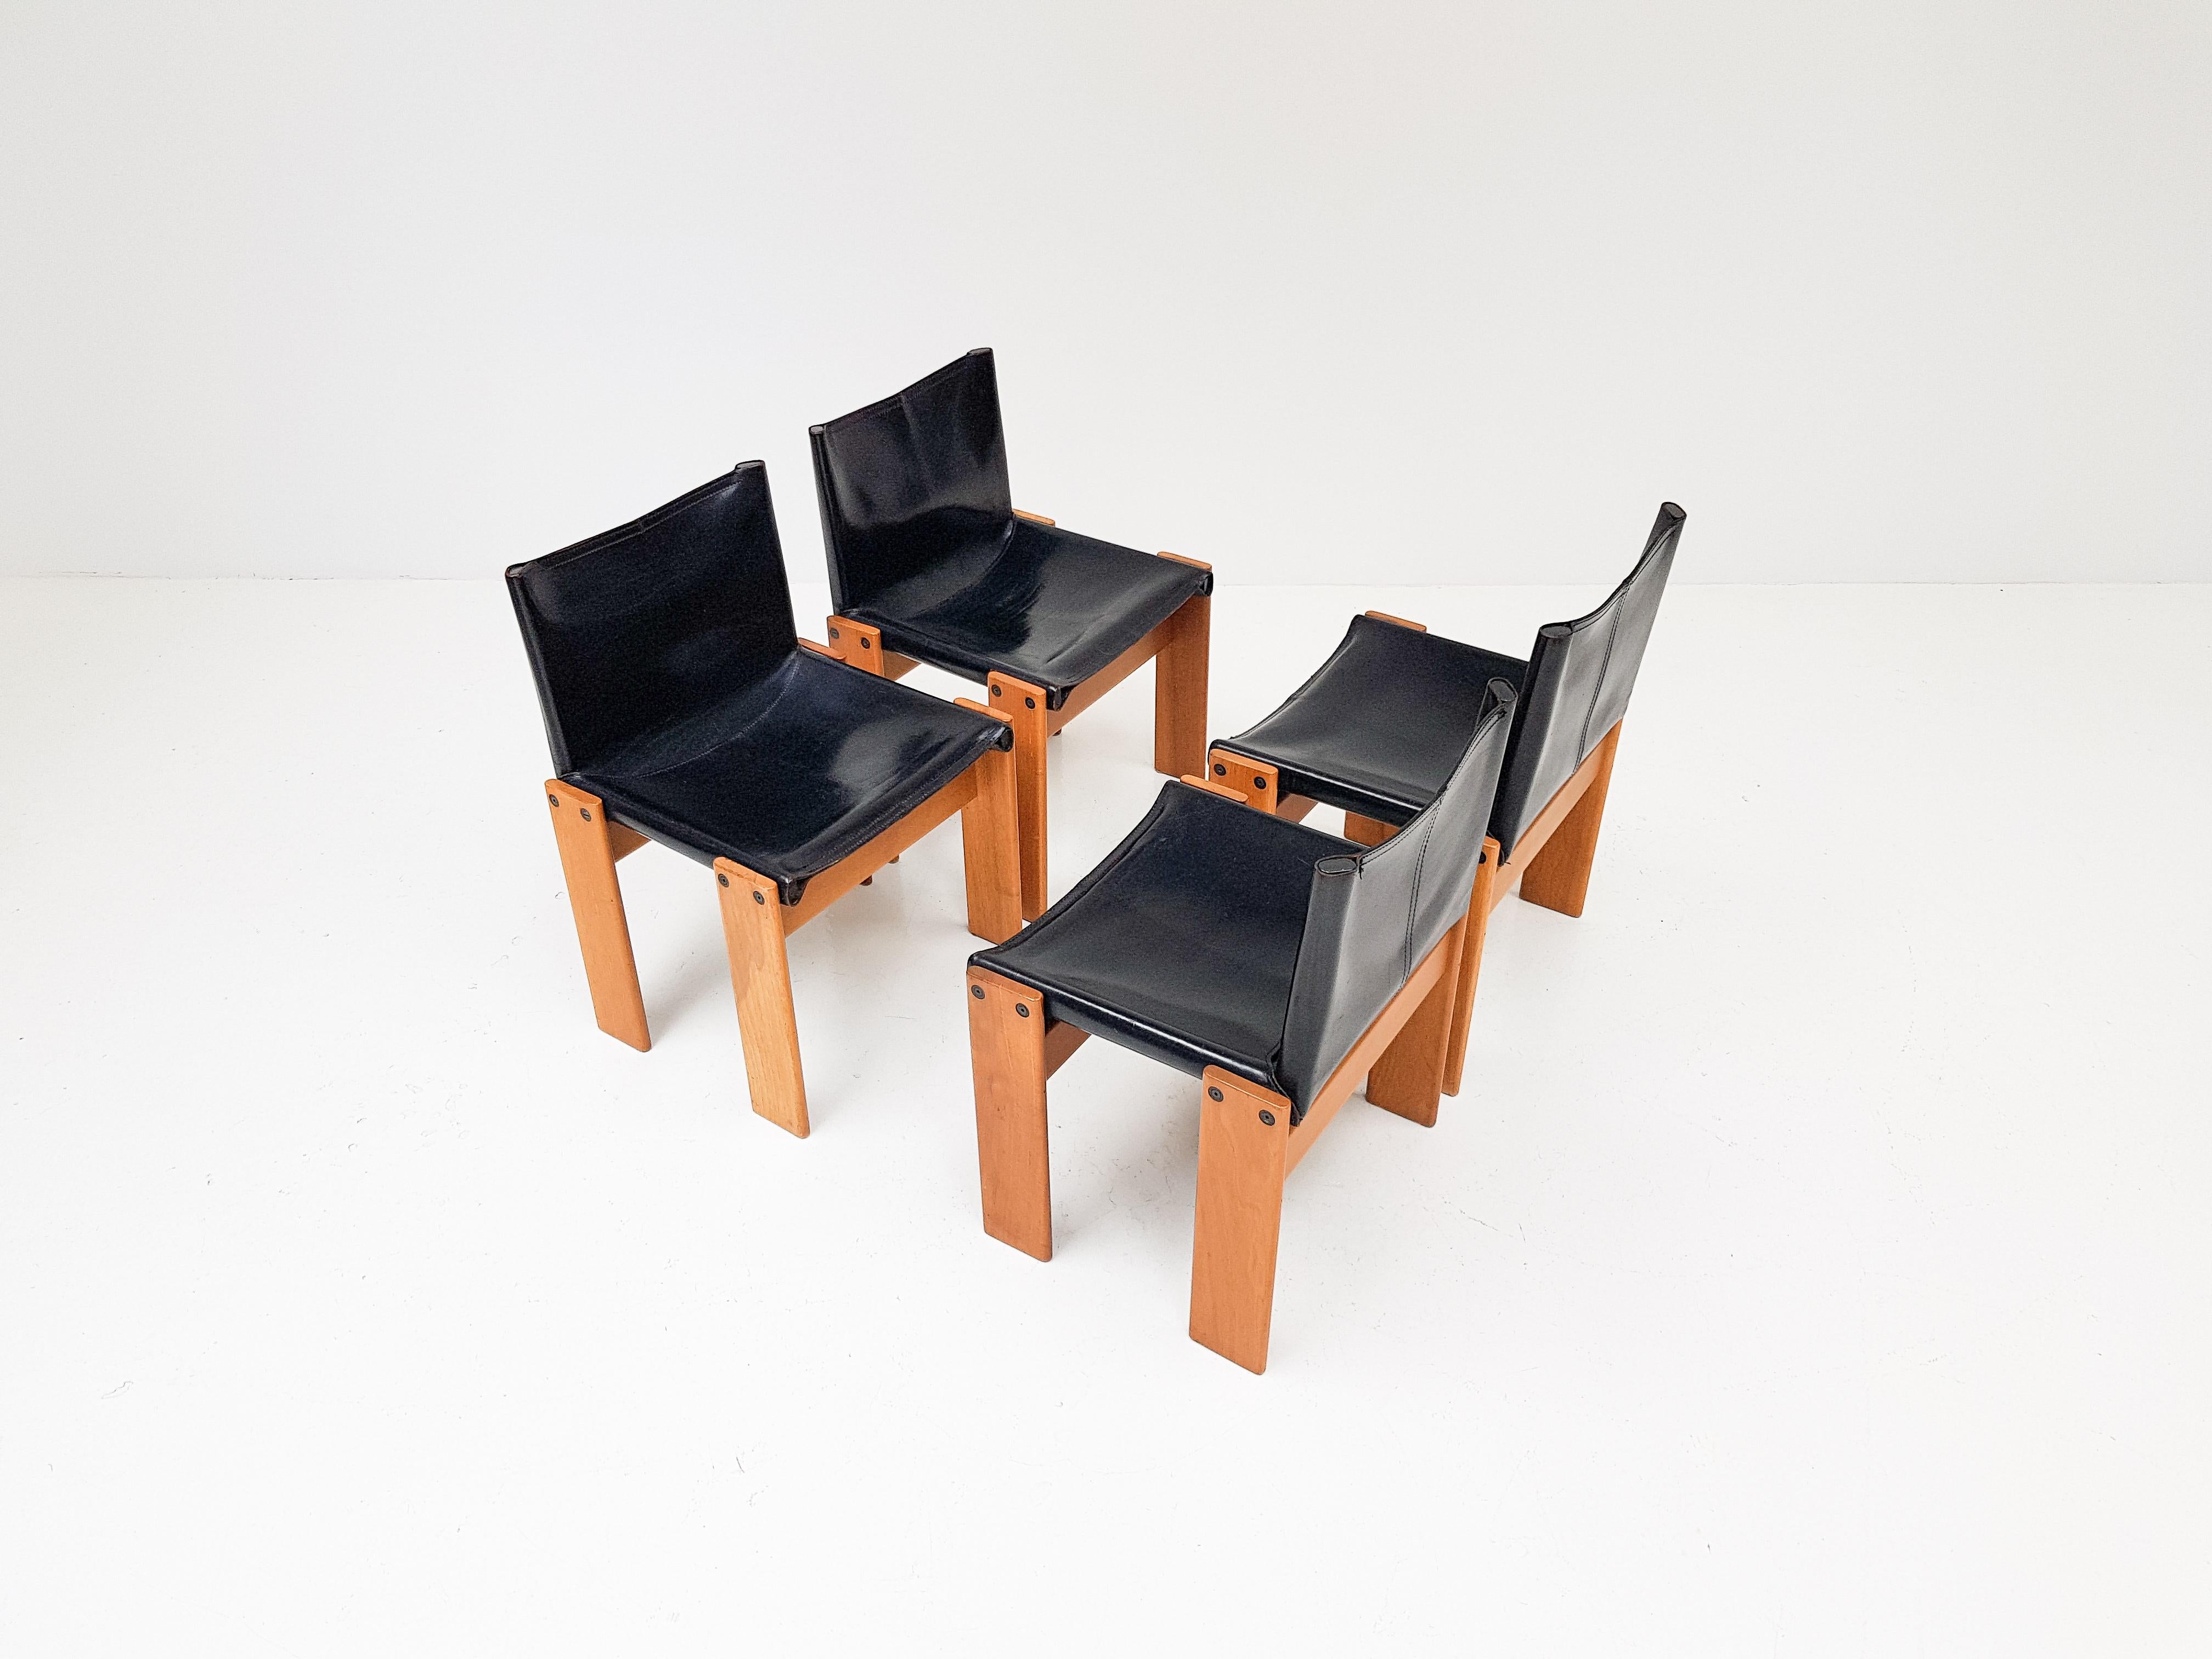 20th Century Set of 4 'Monk' Dining Chairs by Afra & Tobia Scarpa for Molteni, Italy, 1974